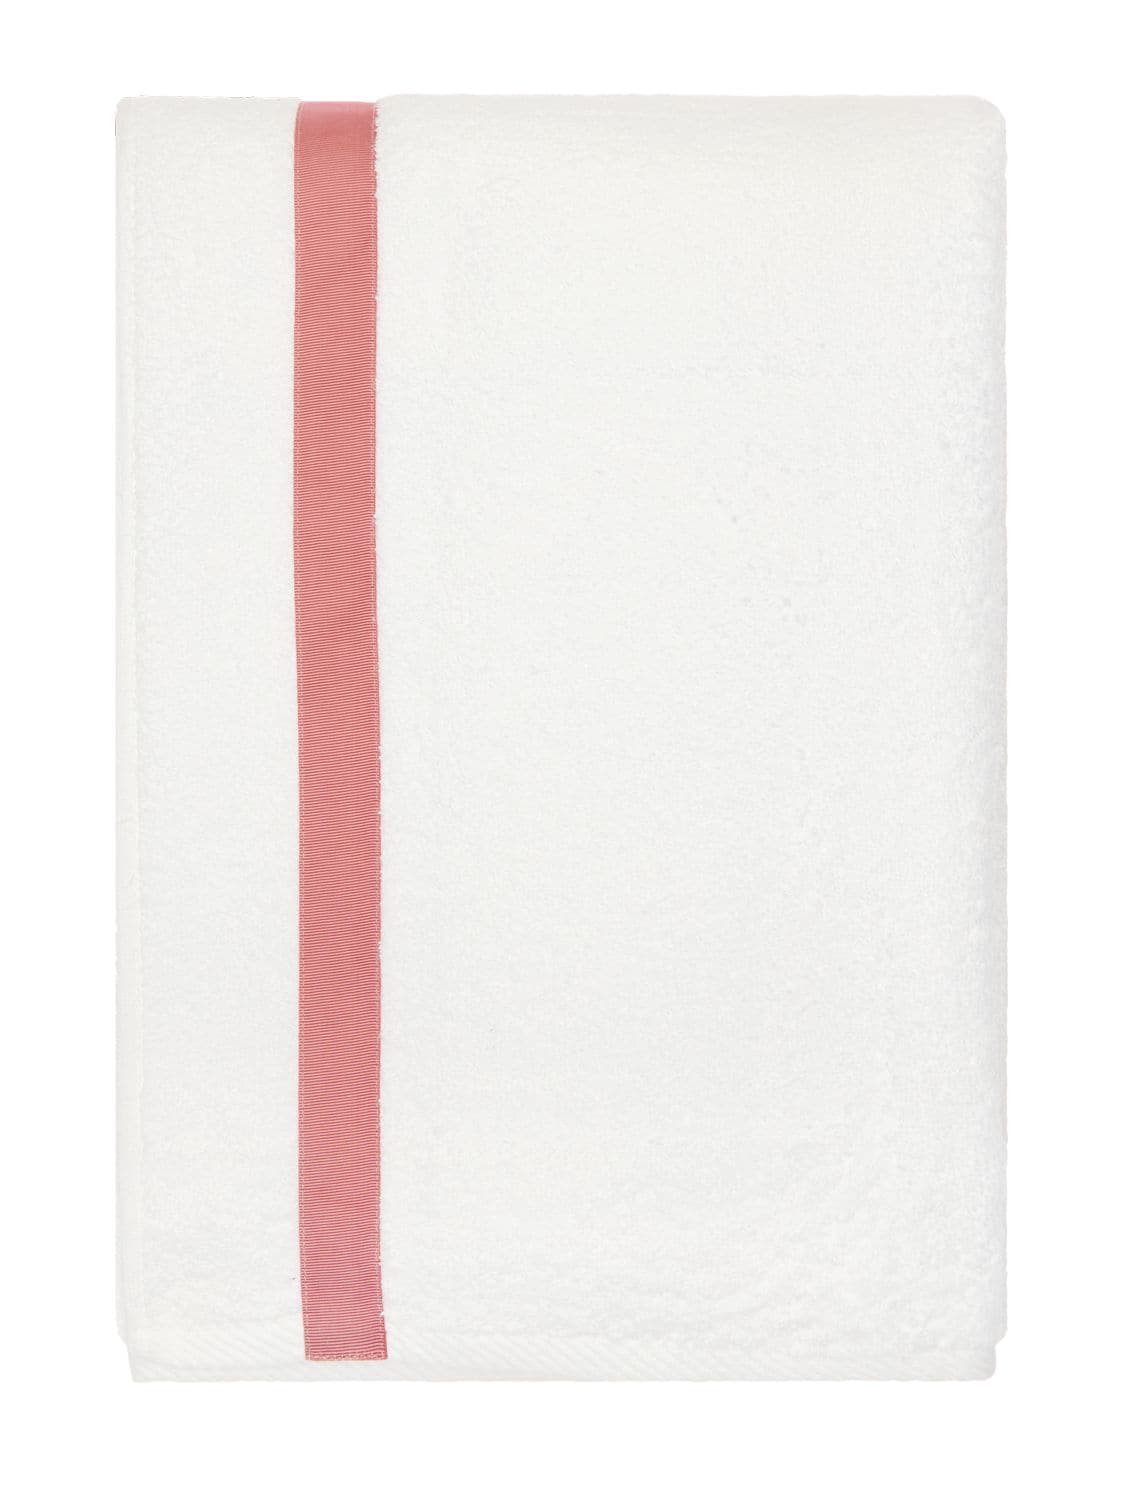 Alessandro Di Marco Cotton Terrycloth Bath Towel In White,pink